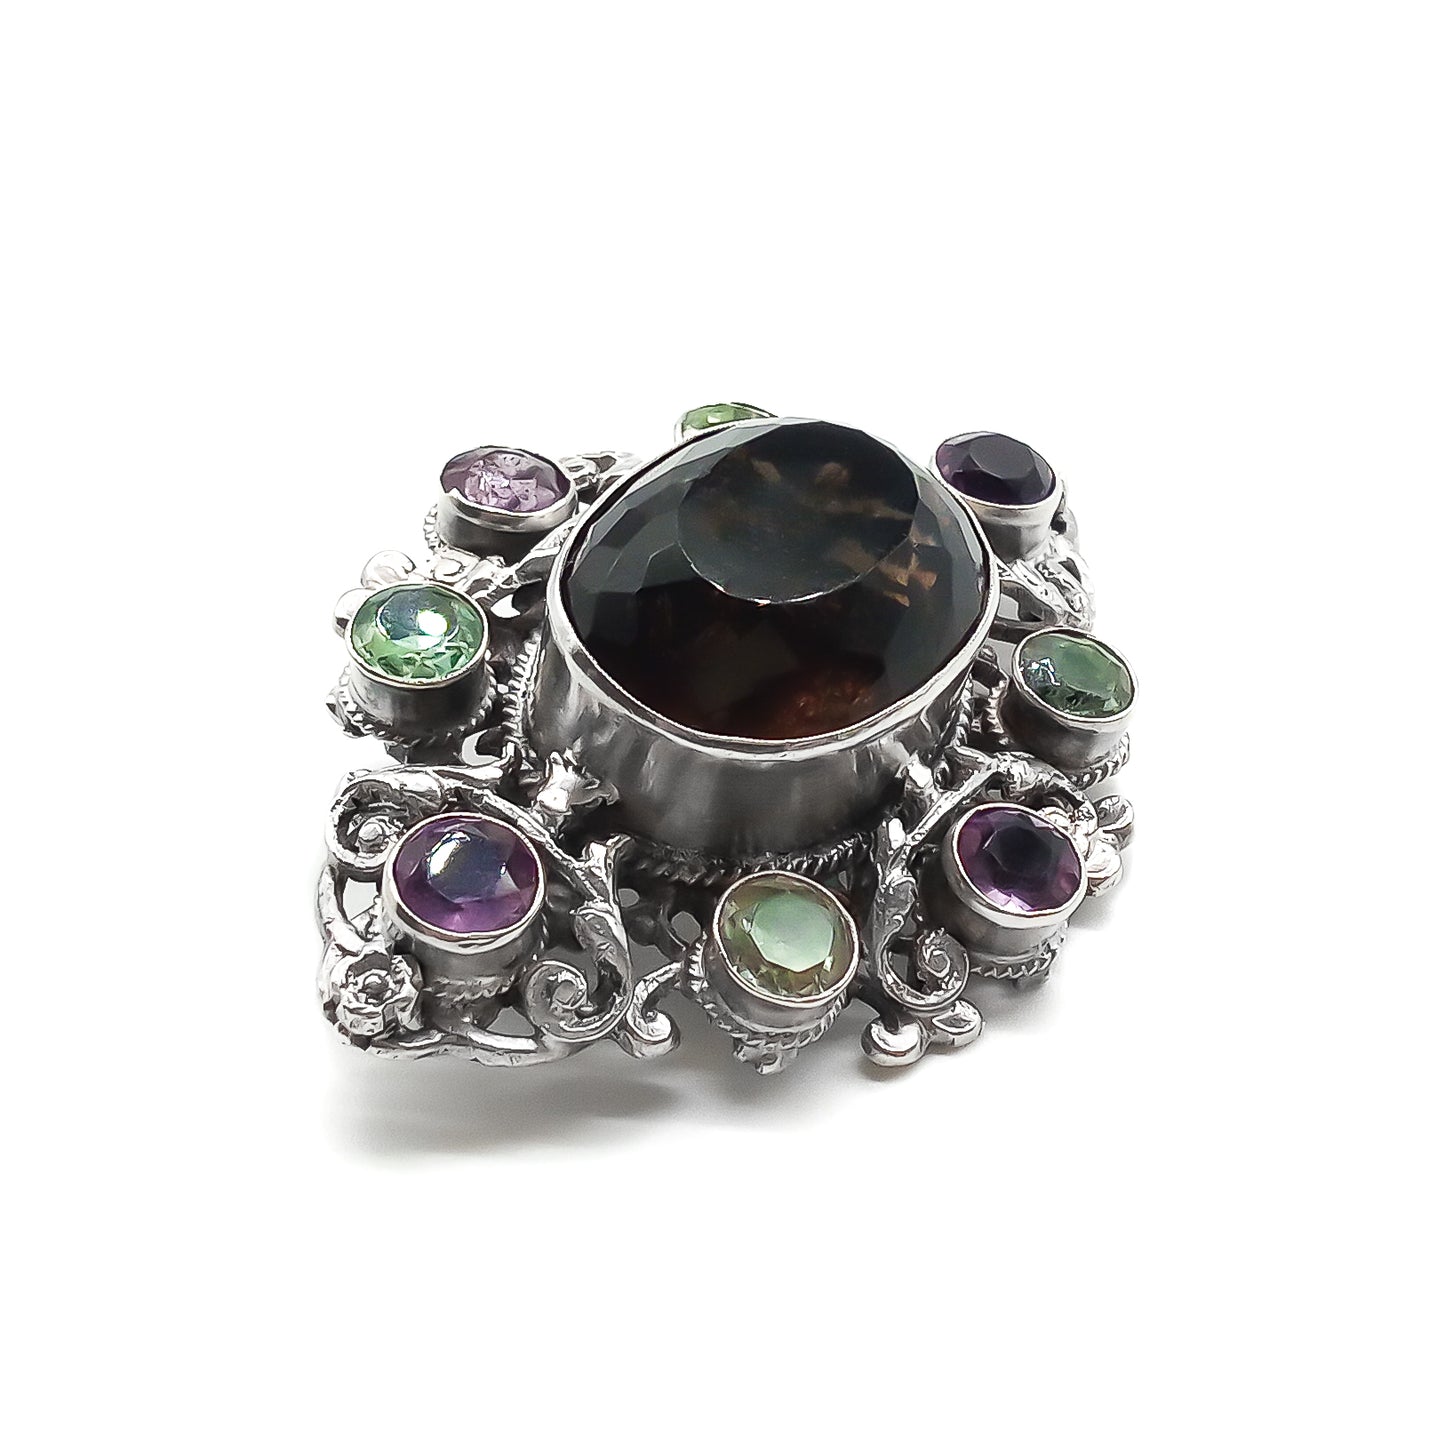 Stunning Arts and Crafts Zoltan White and Co. silver brooch set with a large oval smoky quartz and eight green and purple amethysts. Circa 1920’s